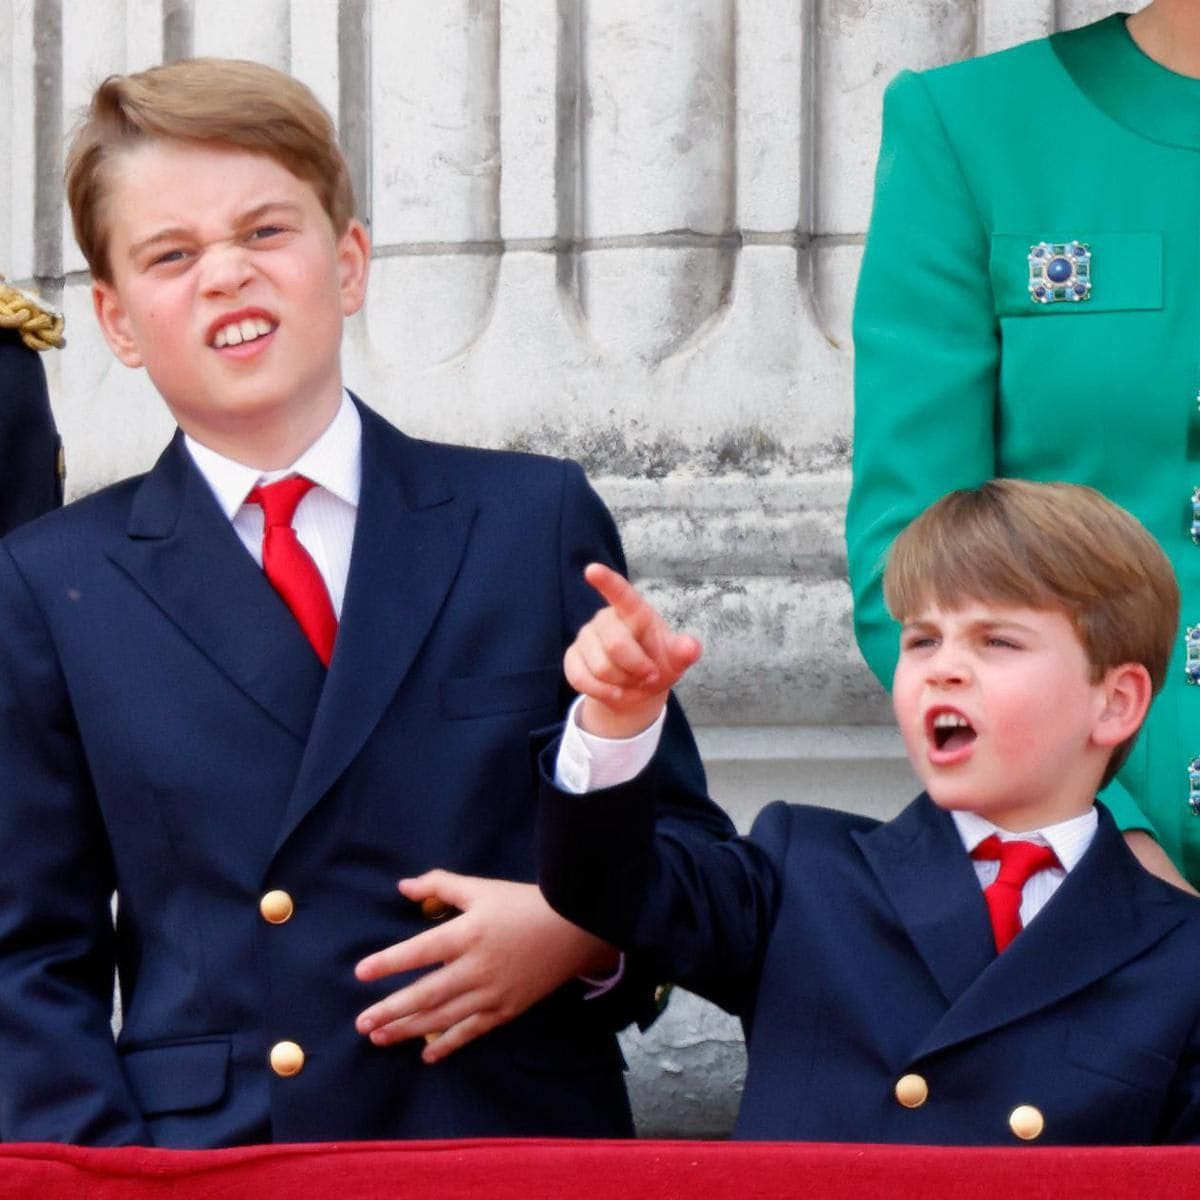 The royal brothers twinned wearing navy jackets and red ties.